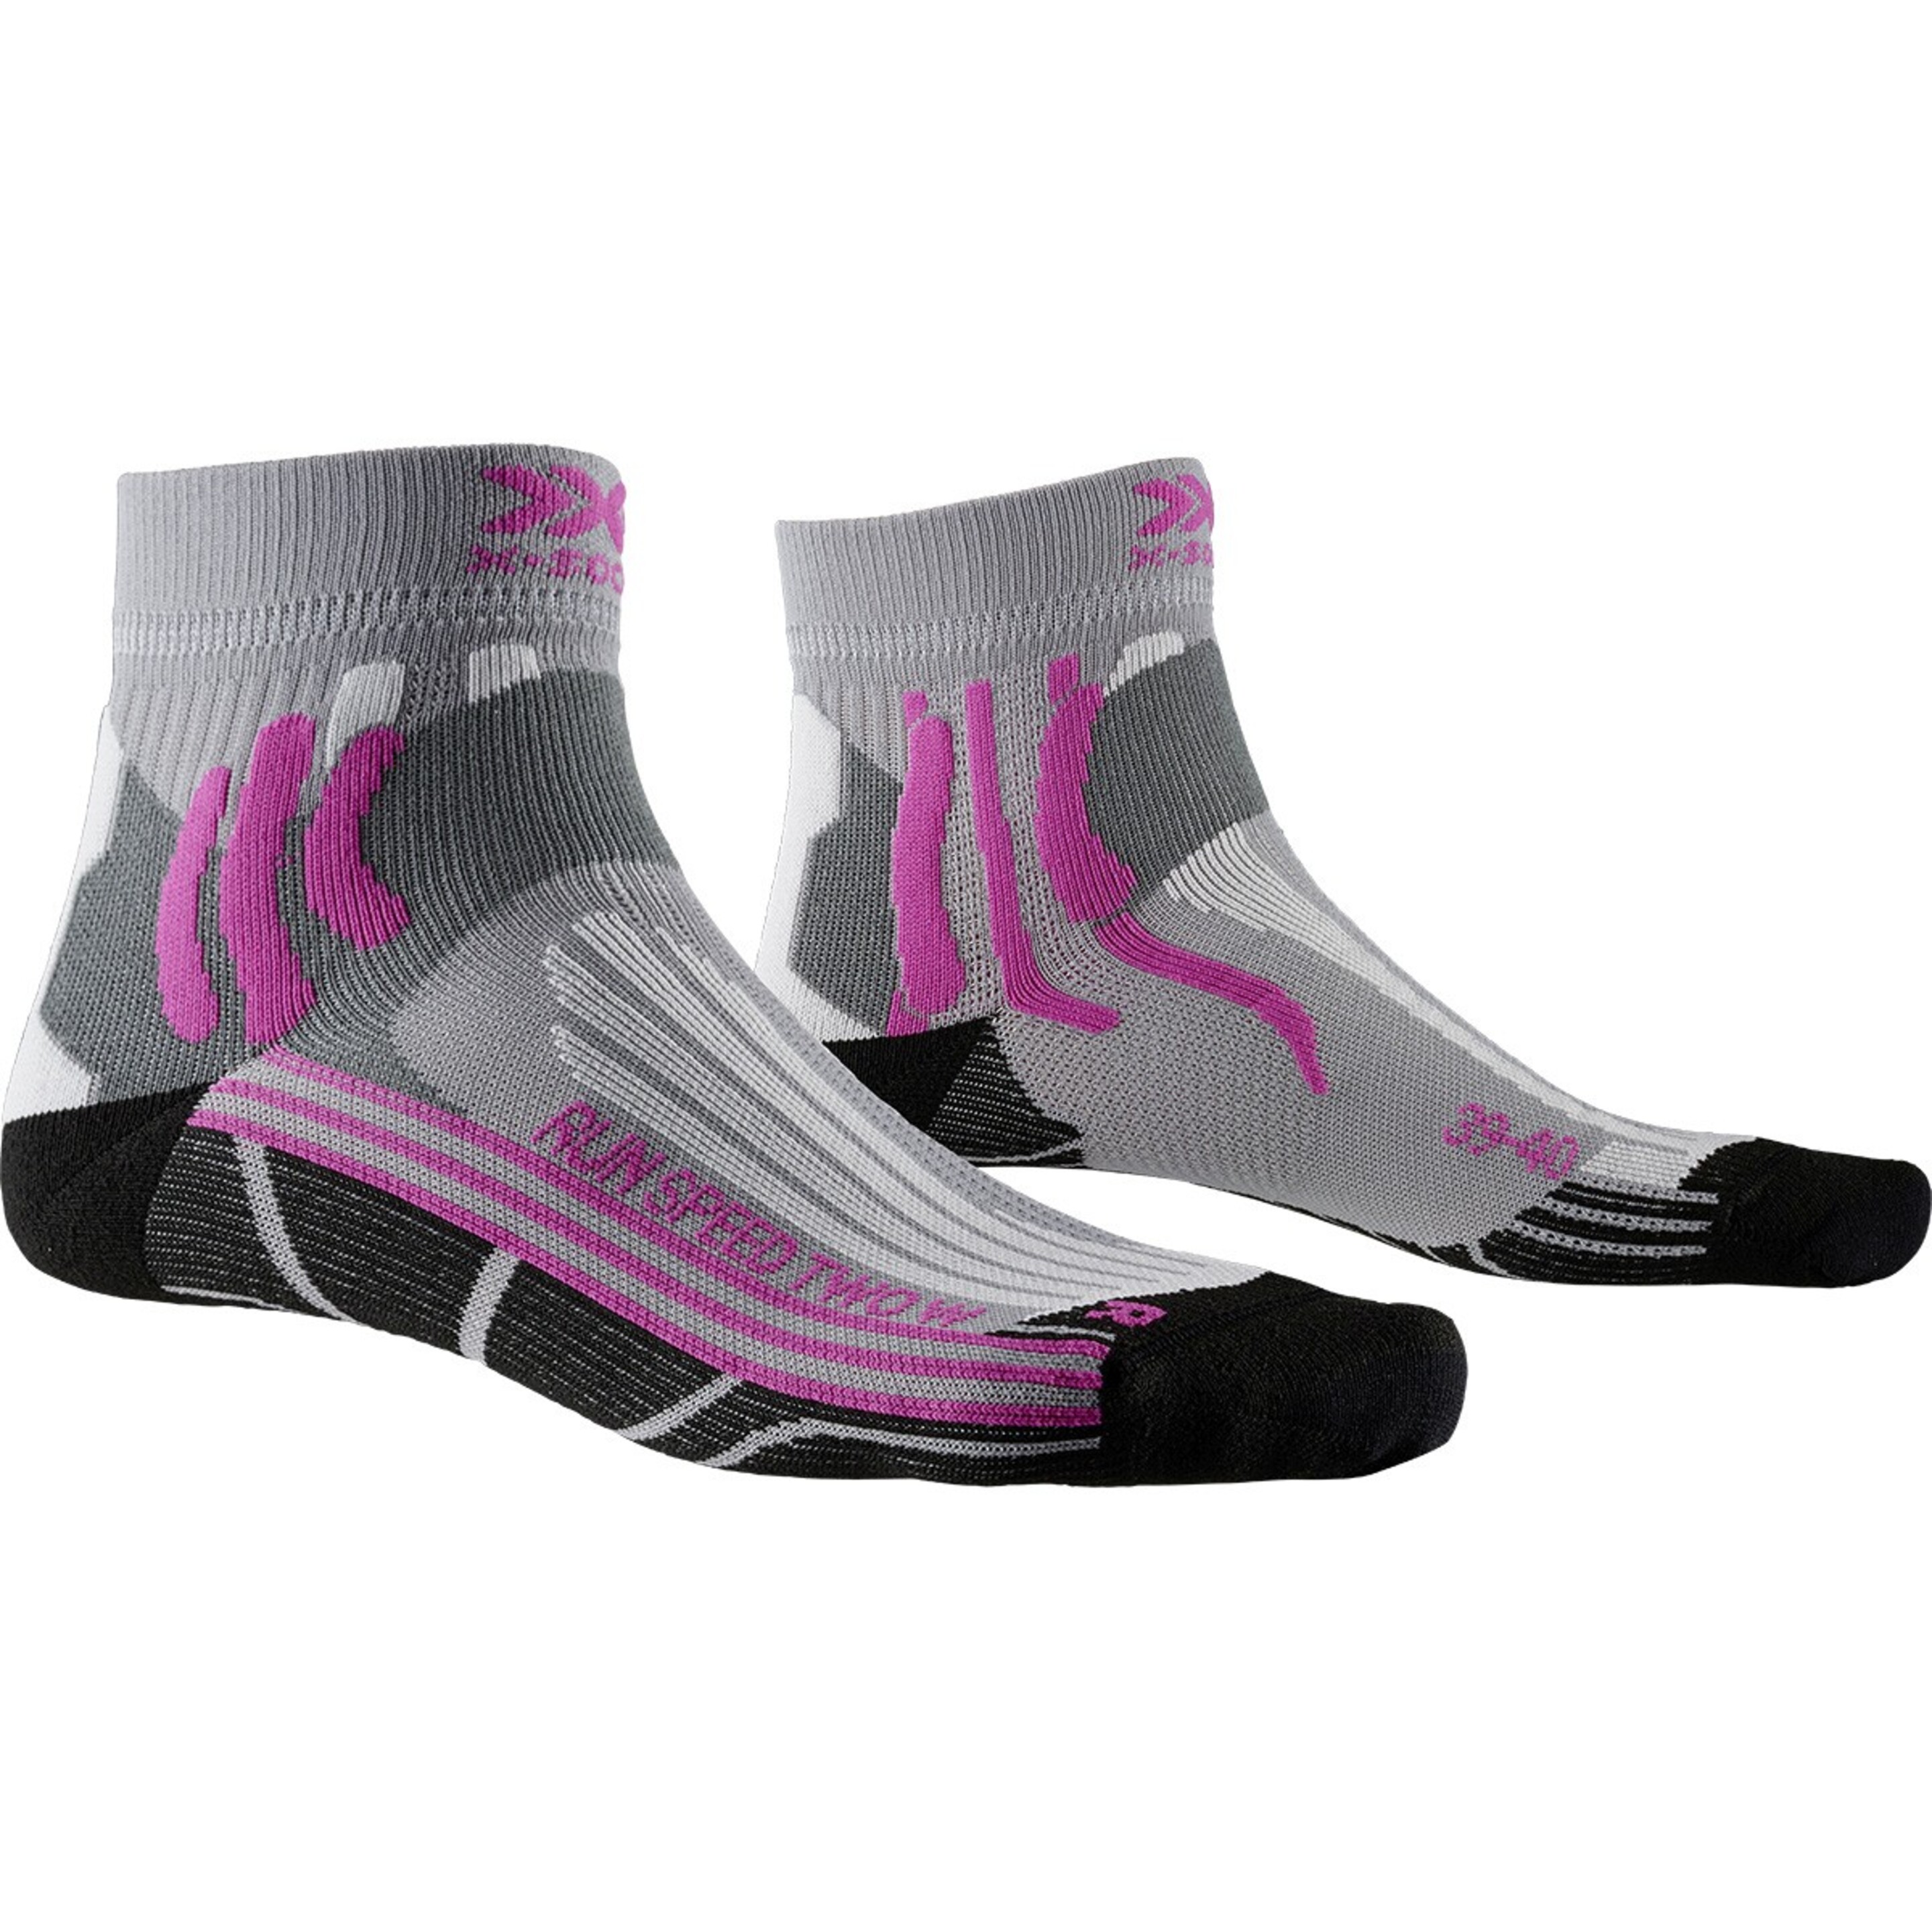 Calcetín Run Speed Two Mujer X-bionic - gris - 